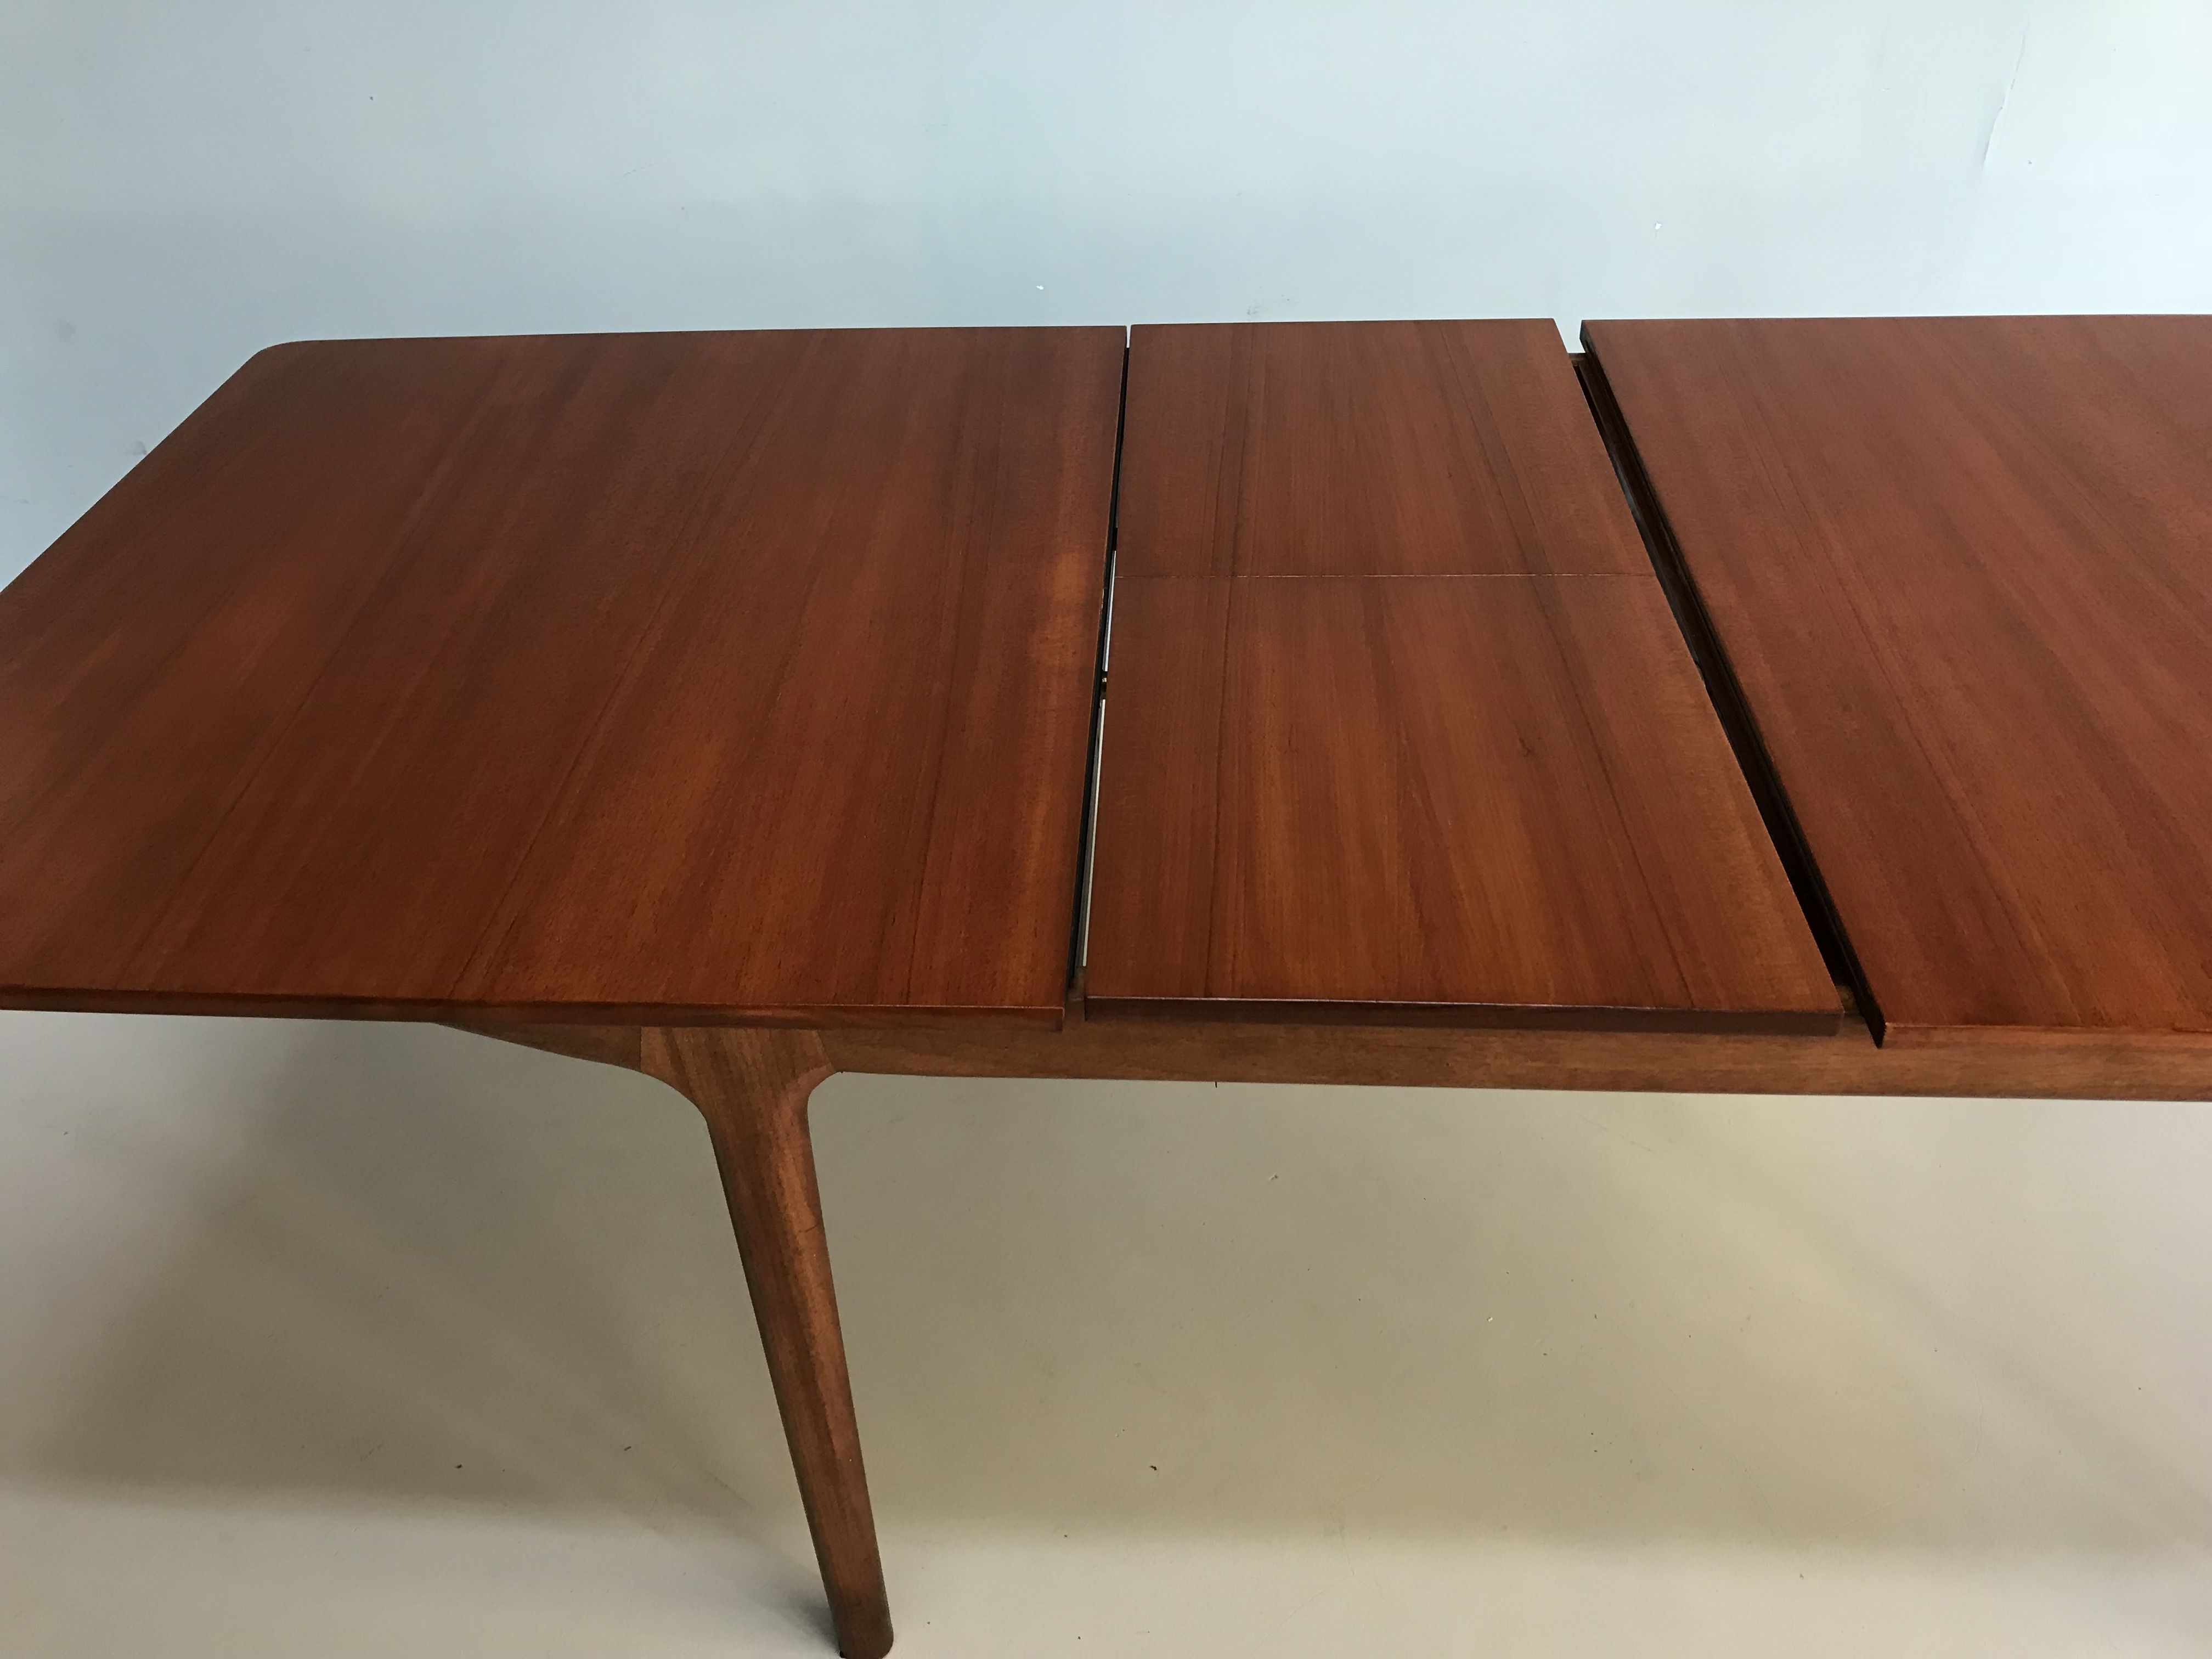 Teak Dining Table For Indoor Use: A Classic Choice